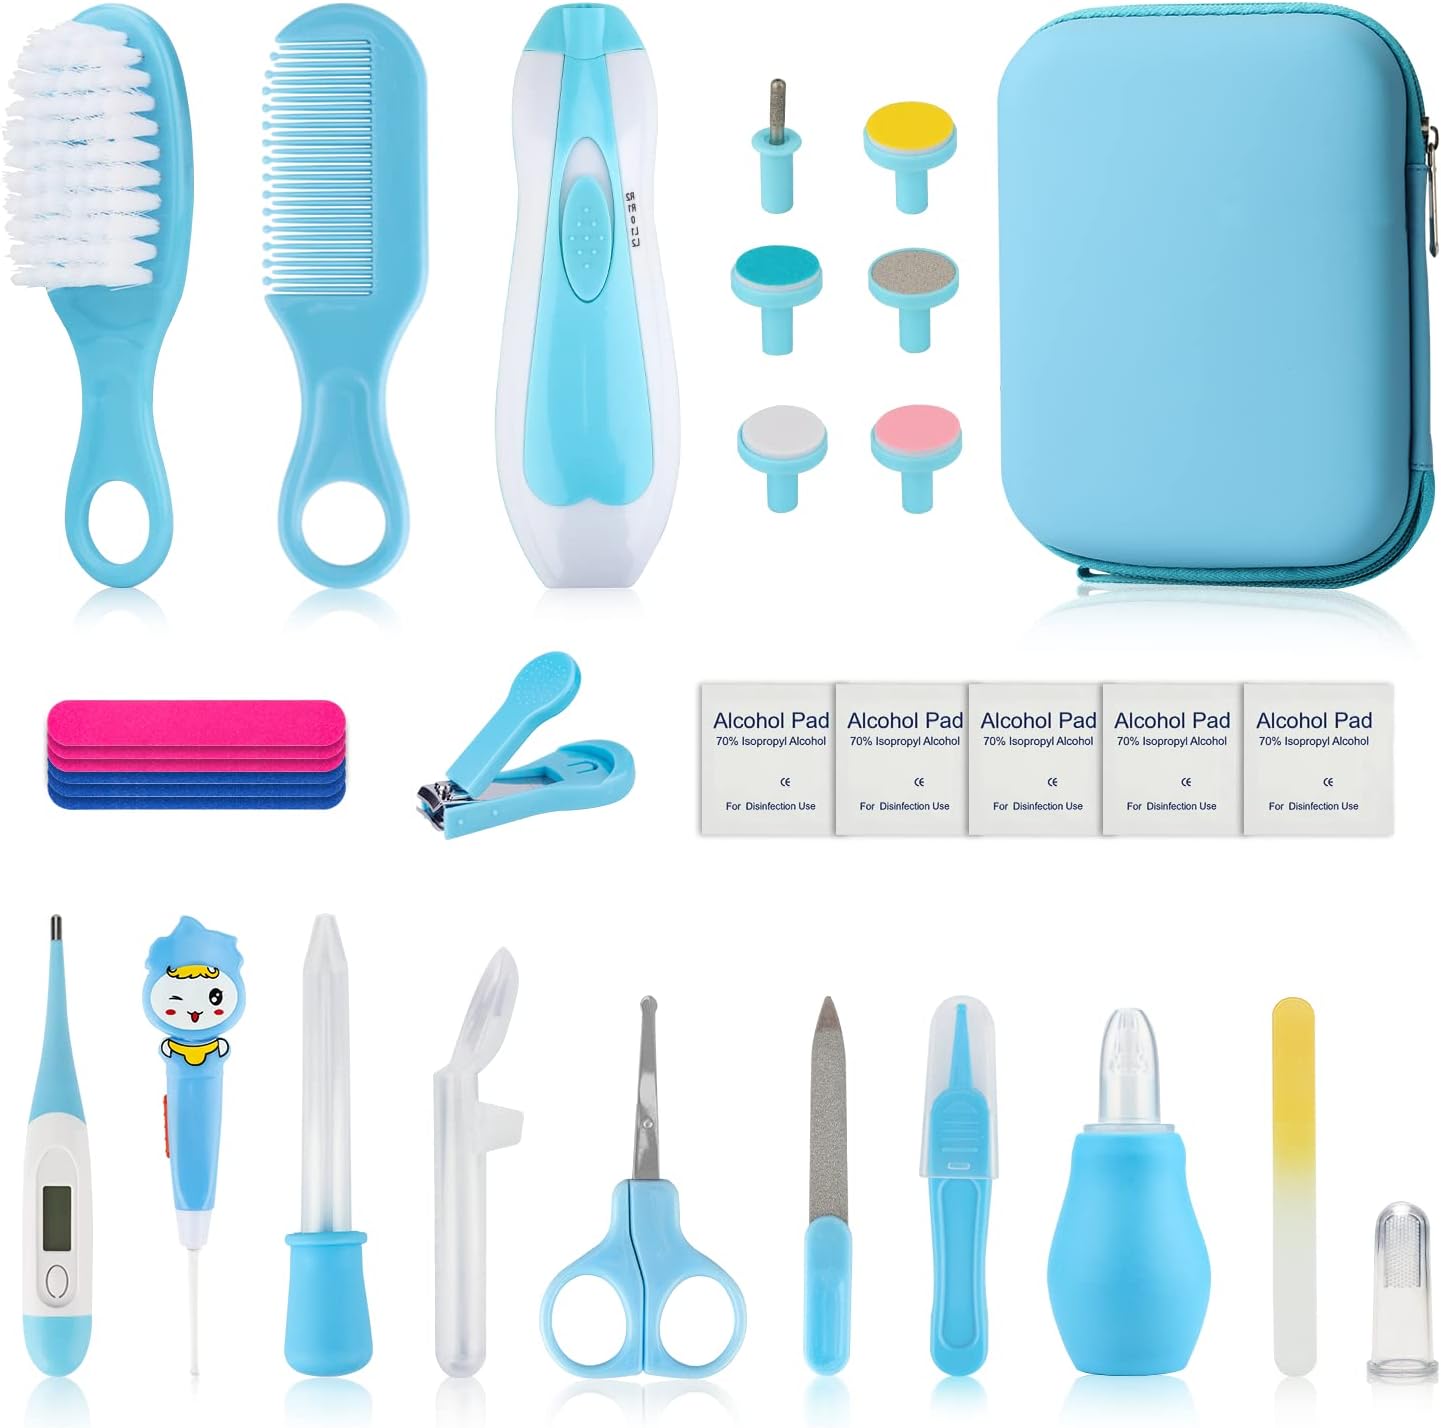 Baby Healthcare and Grooming Kit, Baby Safety Care Set, Baby Electric Nail Trimmer Set Newborn Nursery Health Care Set for Newborn Infant Toddlers Baby Boys Girls Kids (Blue-26 Kits)